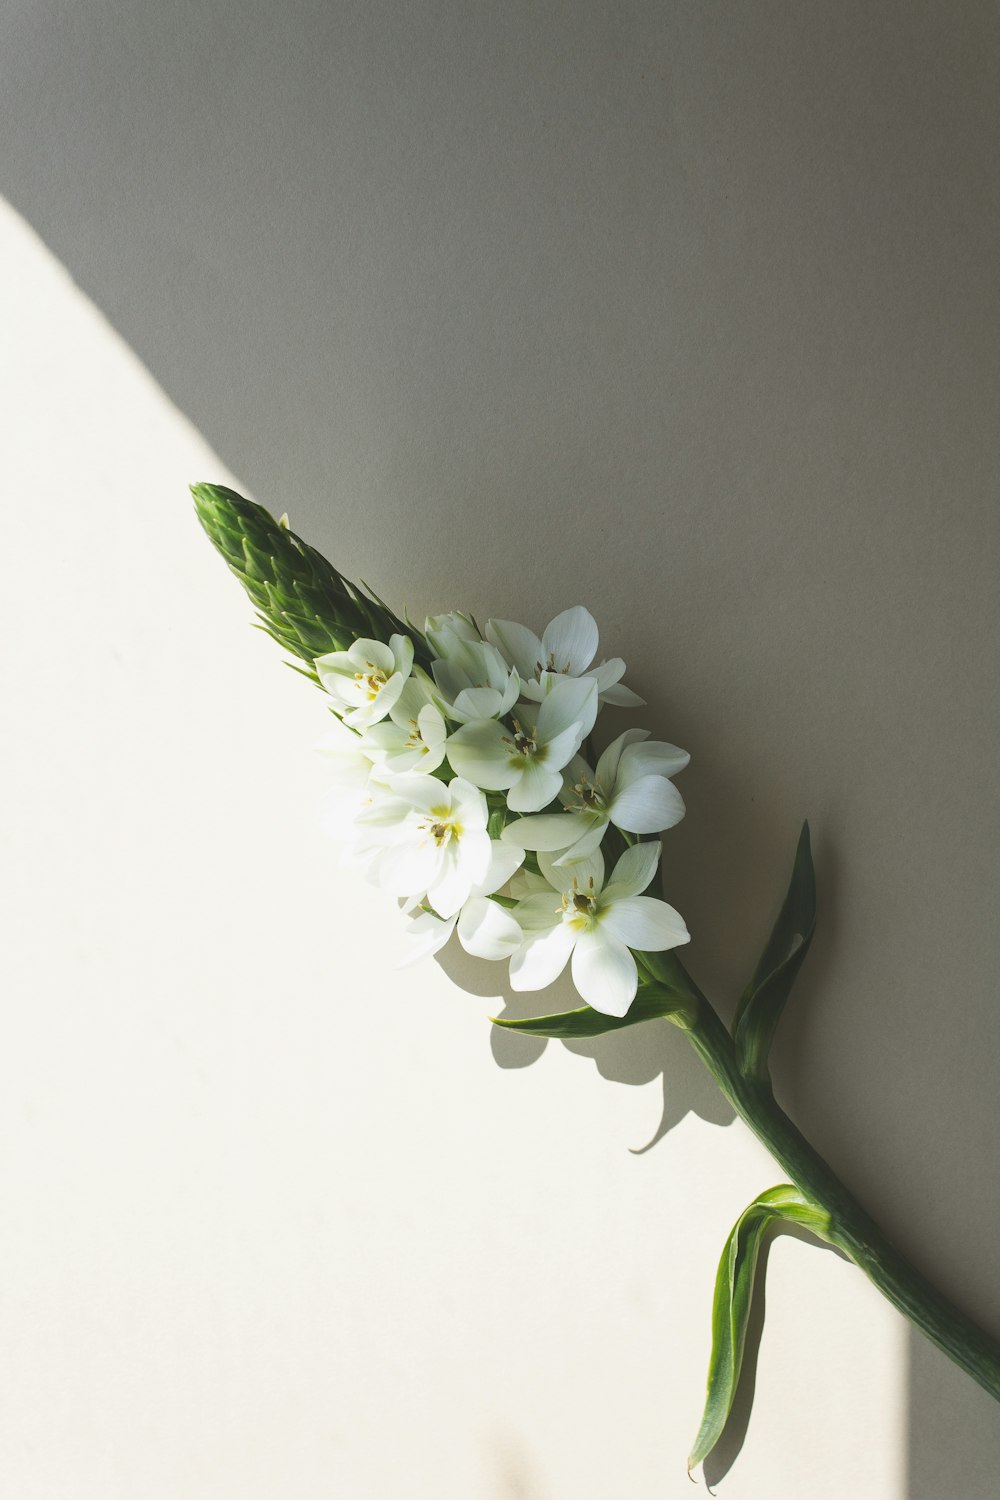 a white flower with green stems on a white surface